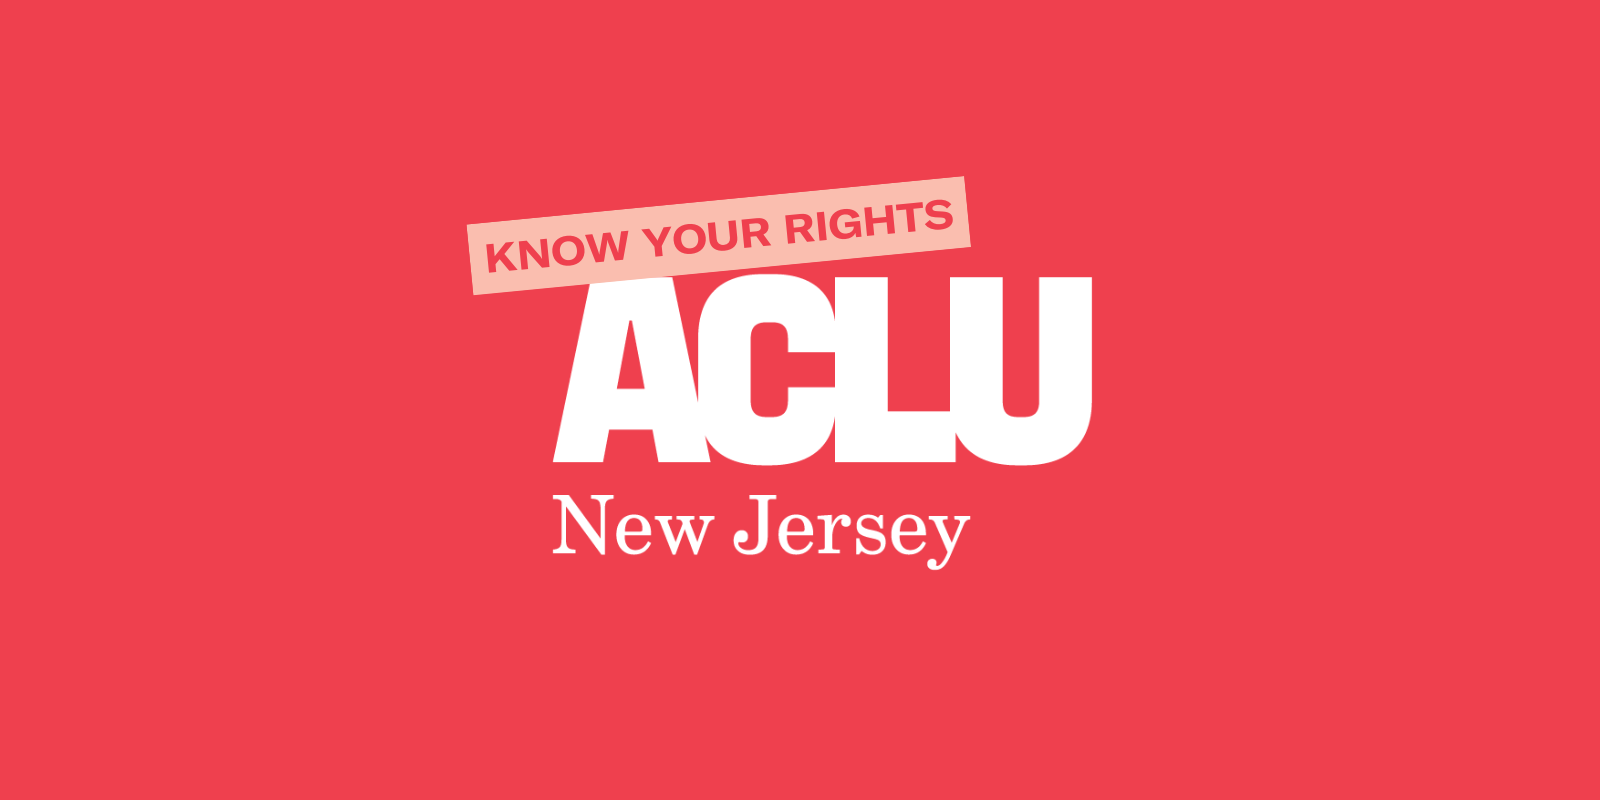 ACLU-NJ logo with a banner at the top reading "Know Your Rights" against a bright red background